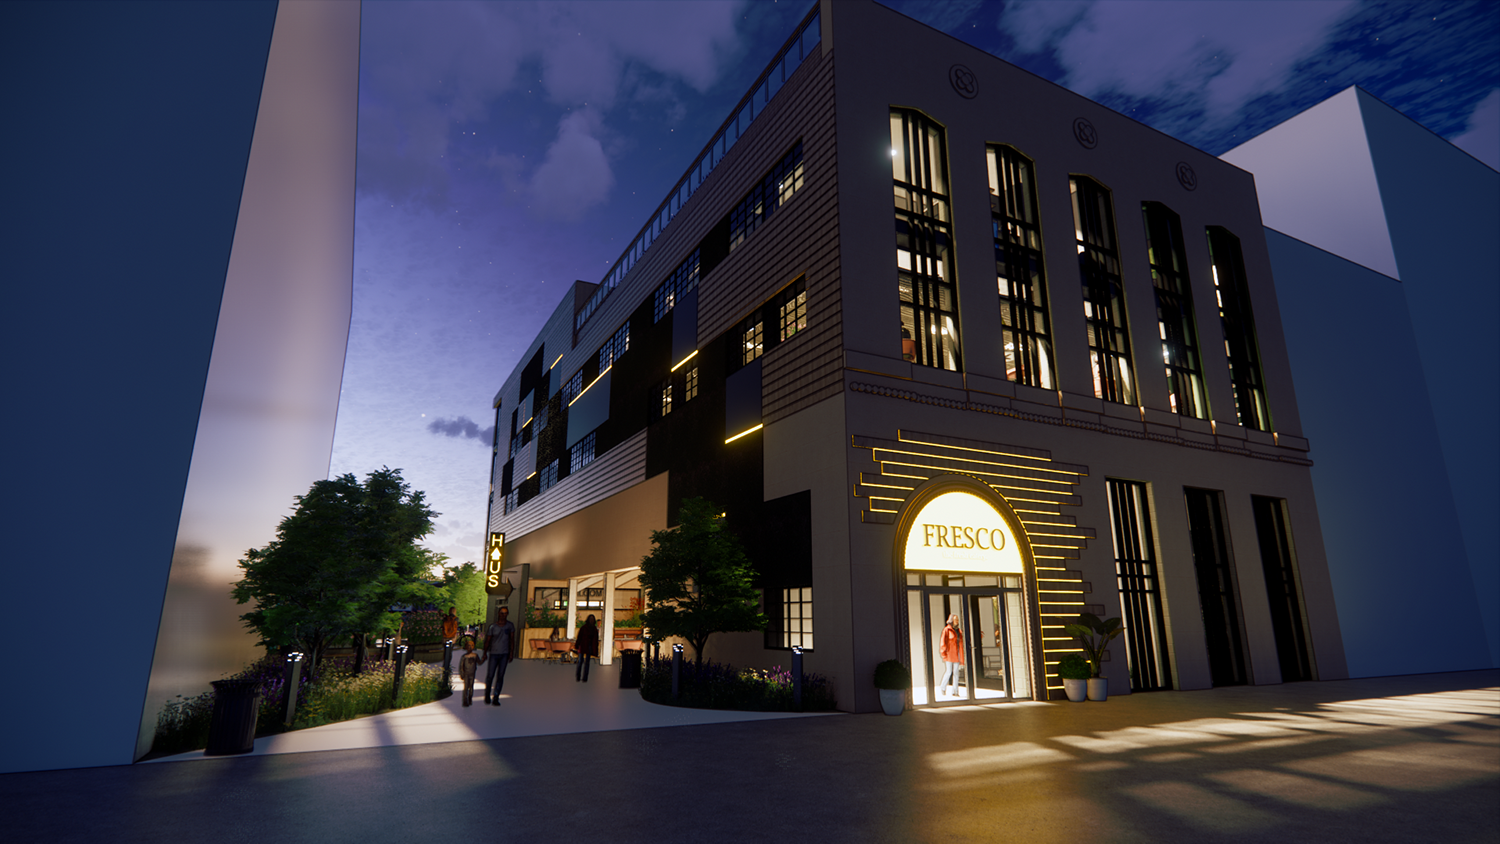 A rendering of the exterior of a building at night.